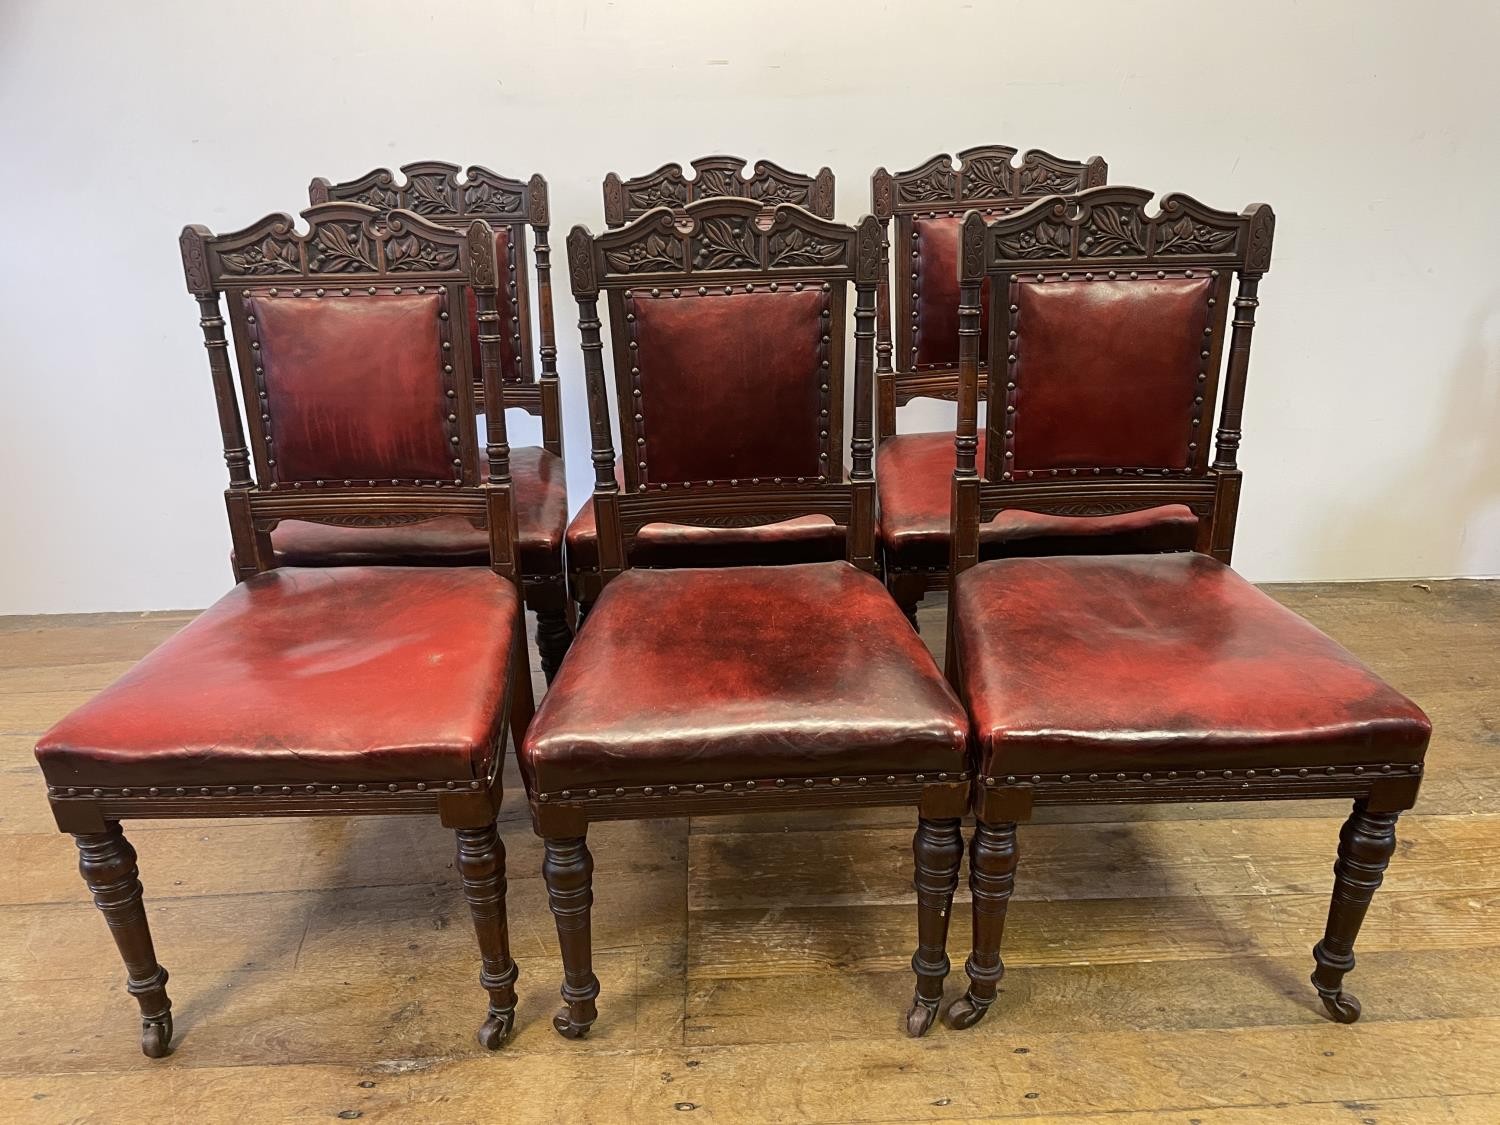 A set of six late 19th century carved walnut dining chairs, with leather padded backs and seats (6) - Image 10 of 11